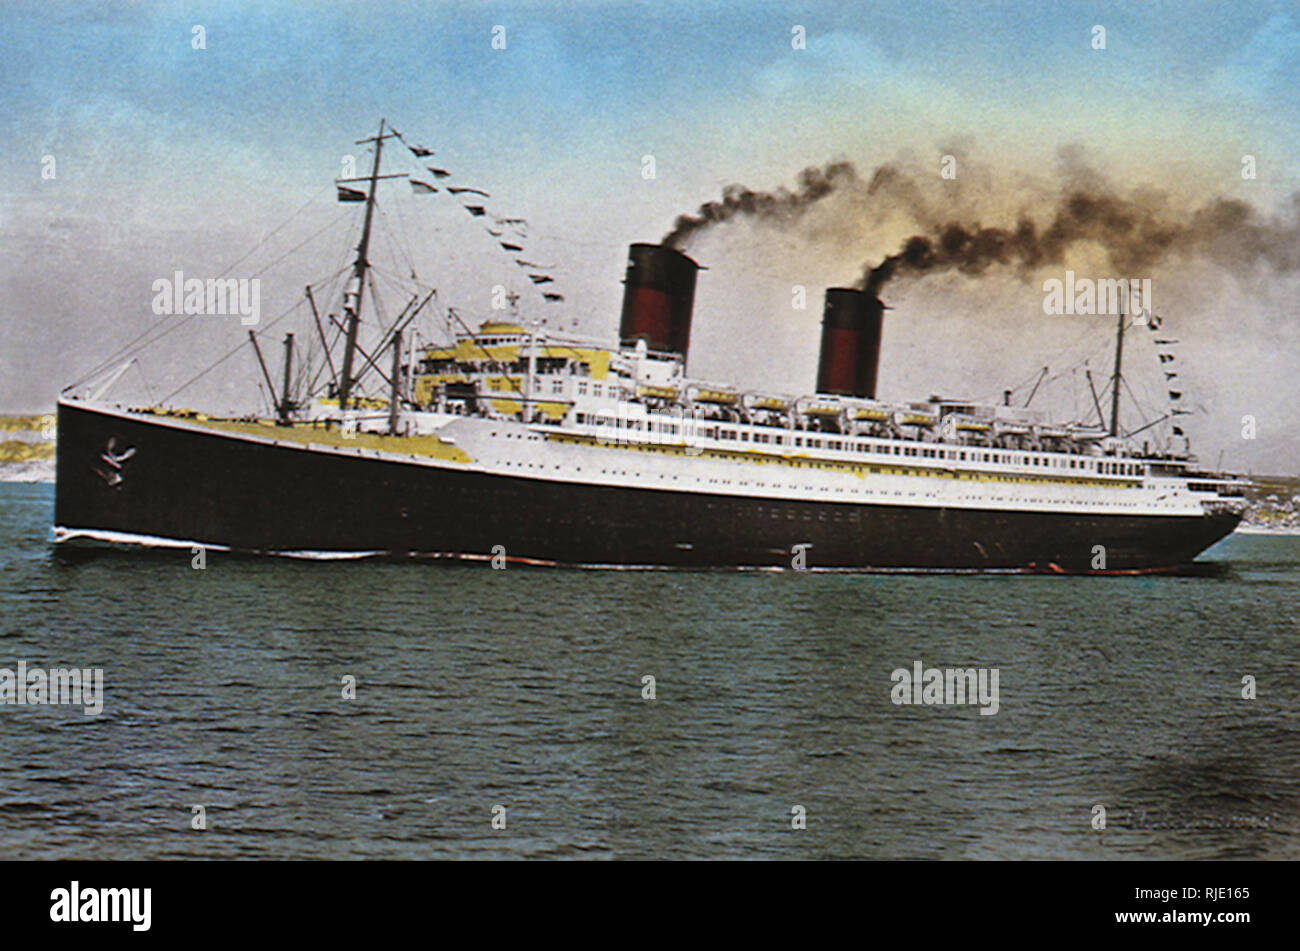 Ship Photo United States Classic Liner Laid Up 6x4 Photograph 10X15 